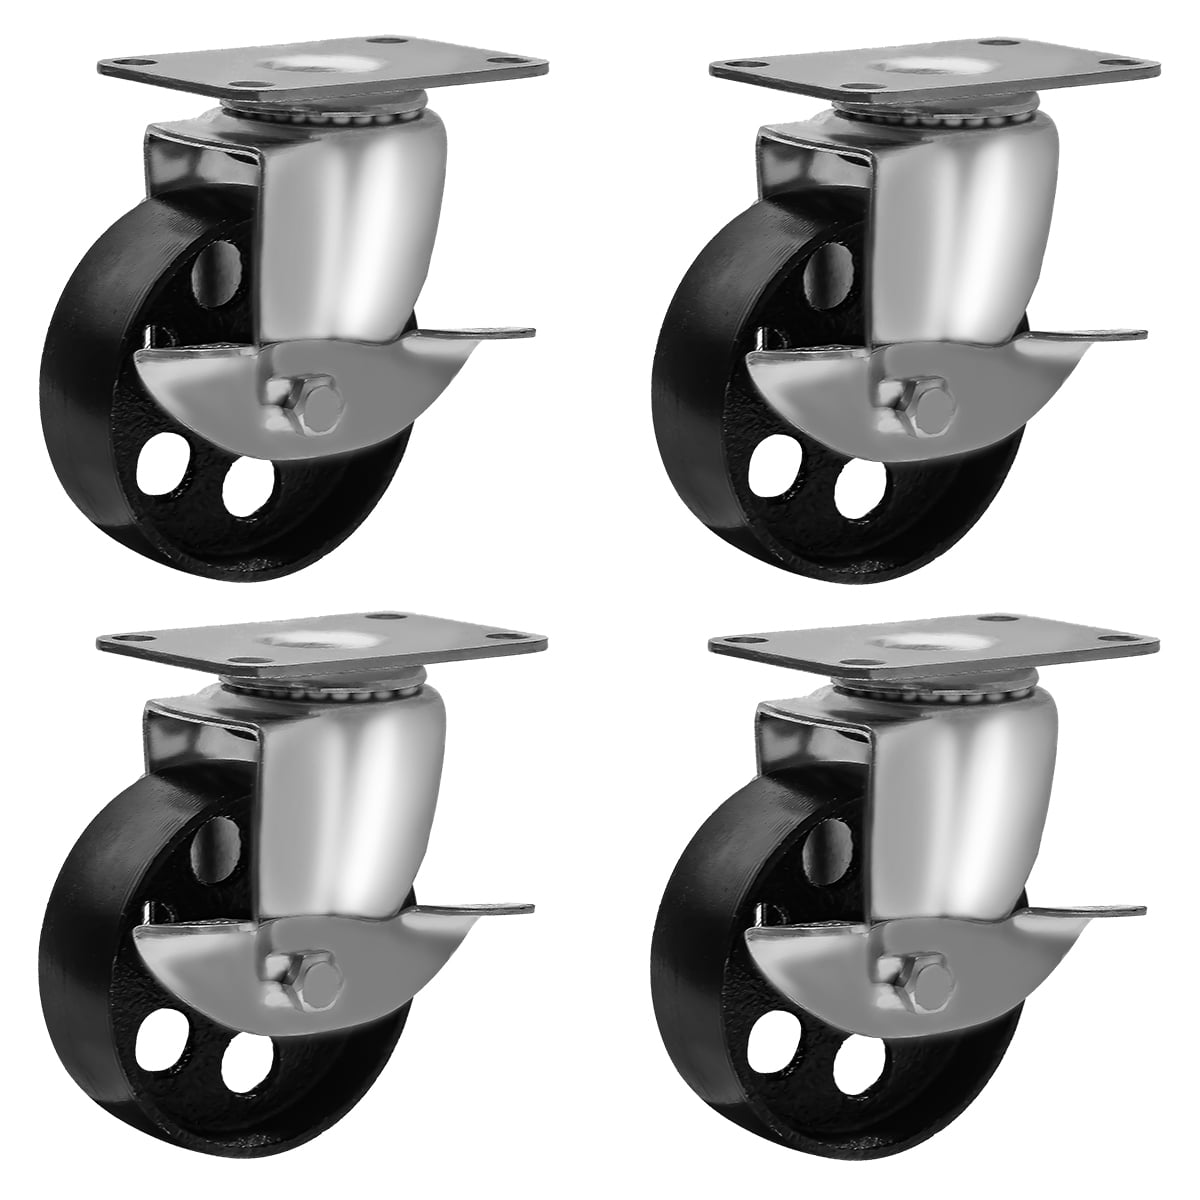 Moving Caster Wheels Trolley Wheels Polyurethane Swivel Castor Wheel,Trolley Furniture Caster,Caster with Brakes,Universal 360 Degree Rotating,con Threaded Rod,Protect Your Carpet/Hardwood,4 Pcs M12, 